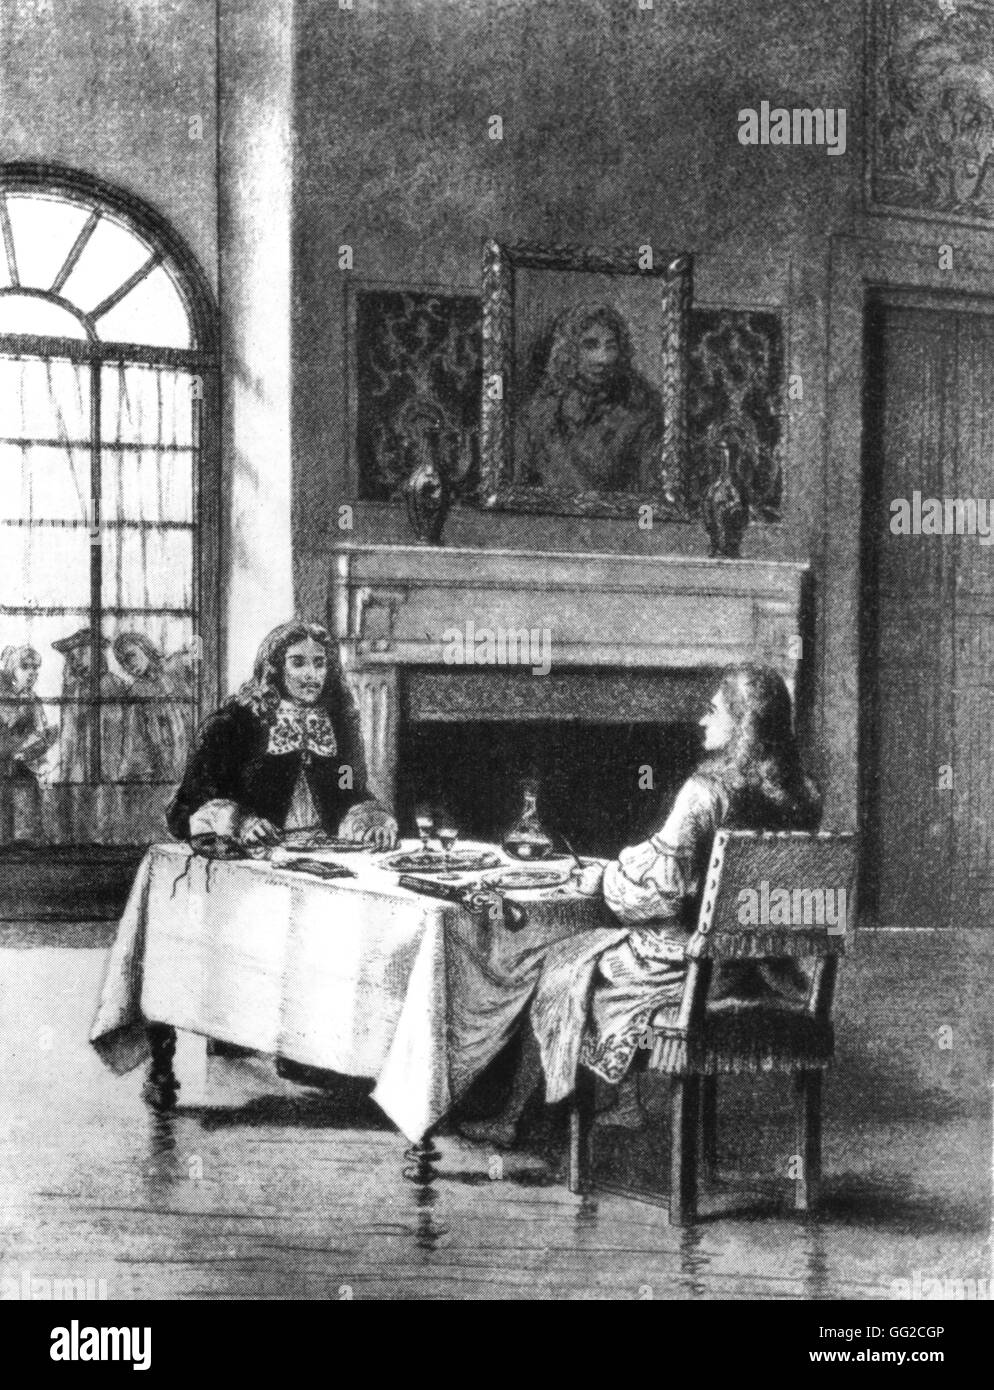 M. de Saint-Marc dining with the Man in the Iron Mask Engraving by R. de Los Rios, illustration (work by Alexandre Dumas) 19th century France Stock Photo